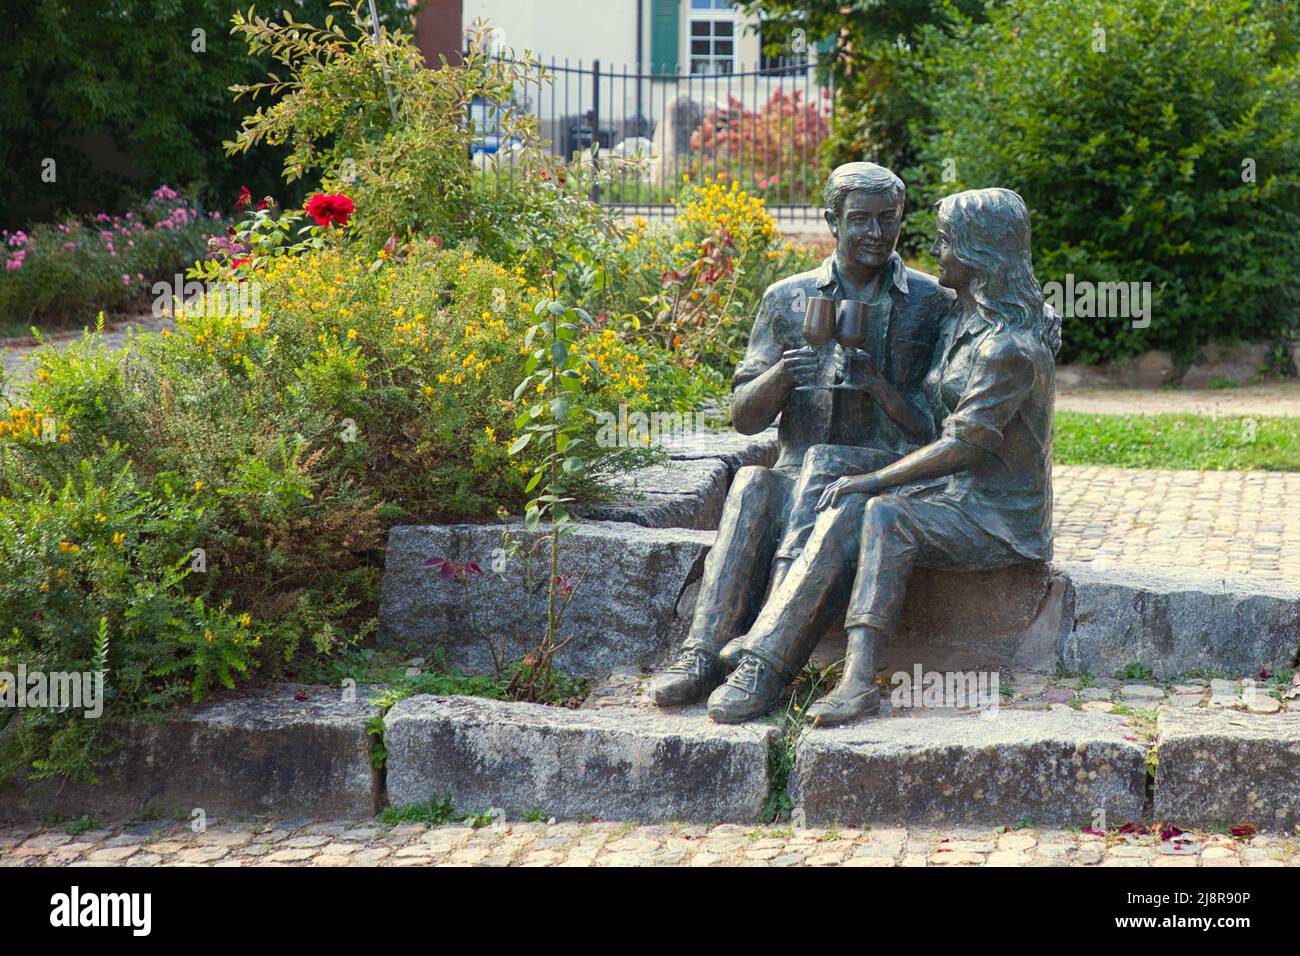 Schliengen, Lörrach, Baden-Württemberg, Germany - September 10, 2021: A sculpture in the castle park shows a couple sitting down on the stone steps an Stock Photo